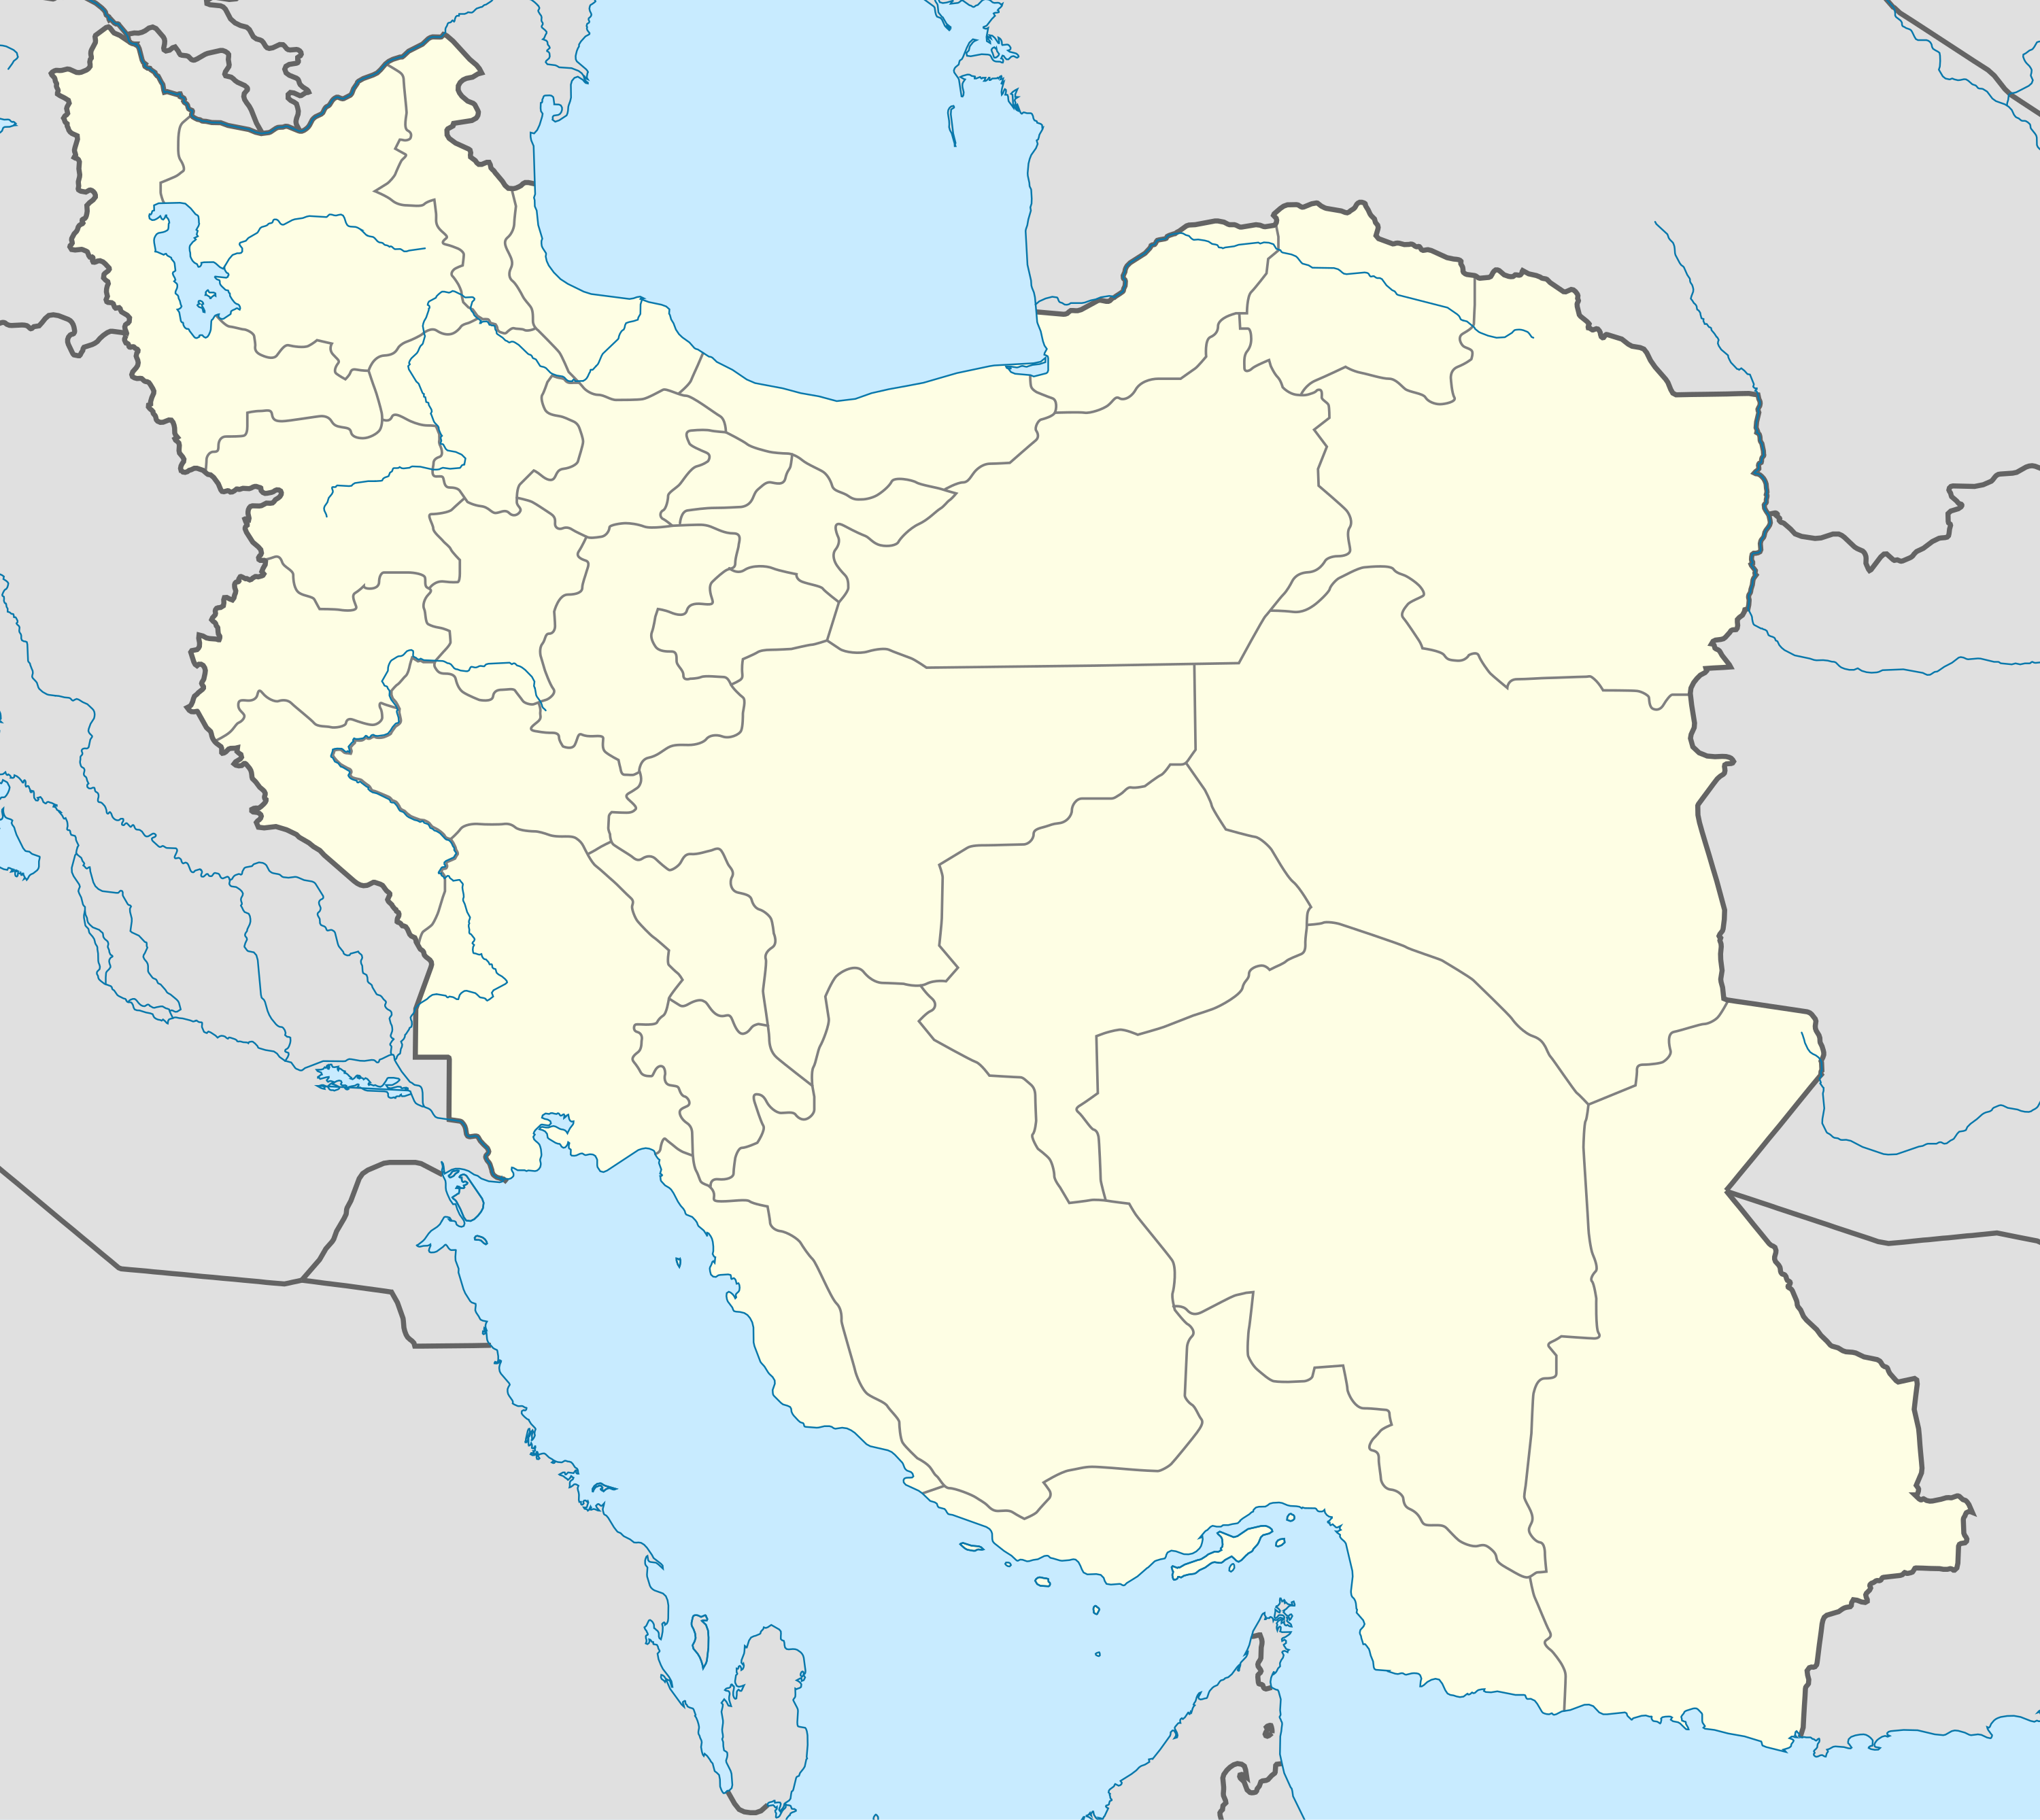 Iranian insurgency detailed map is located in Iran